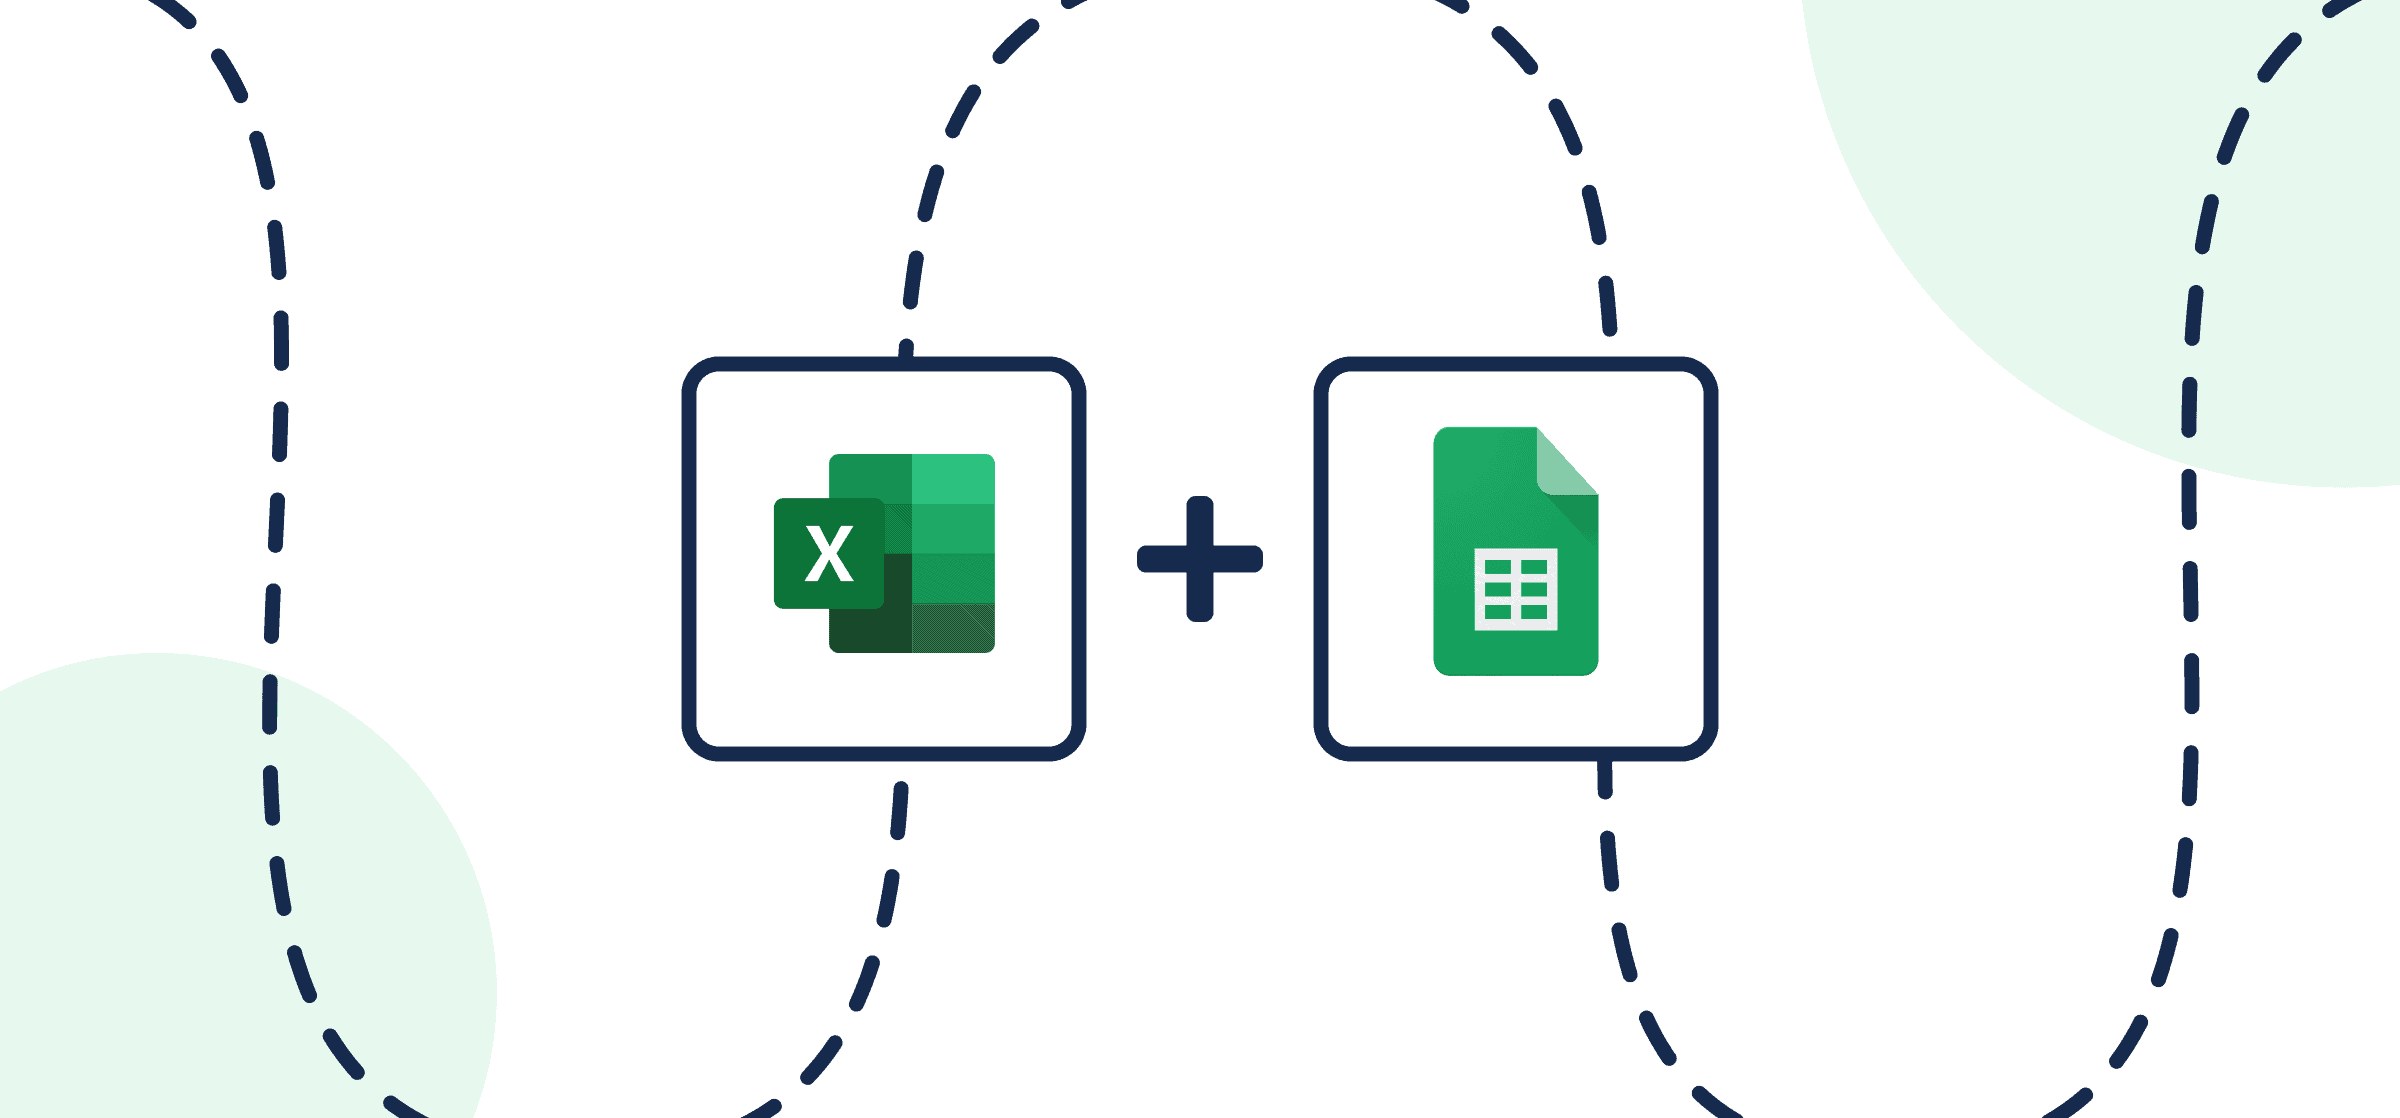 Featured image illustrating a step-by-step guide on syncing Microsoft Excel to Google Sheets through Unito, depicted by the connected logos through circles and dotted lines.